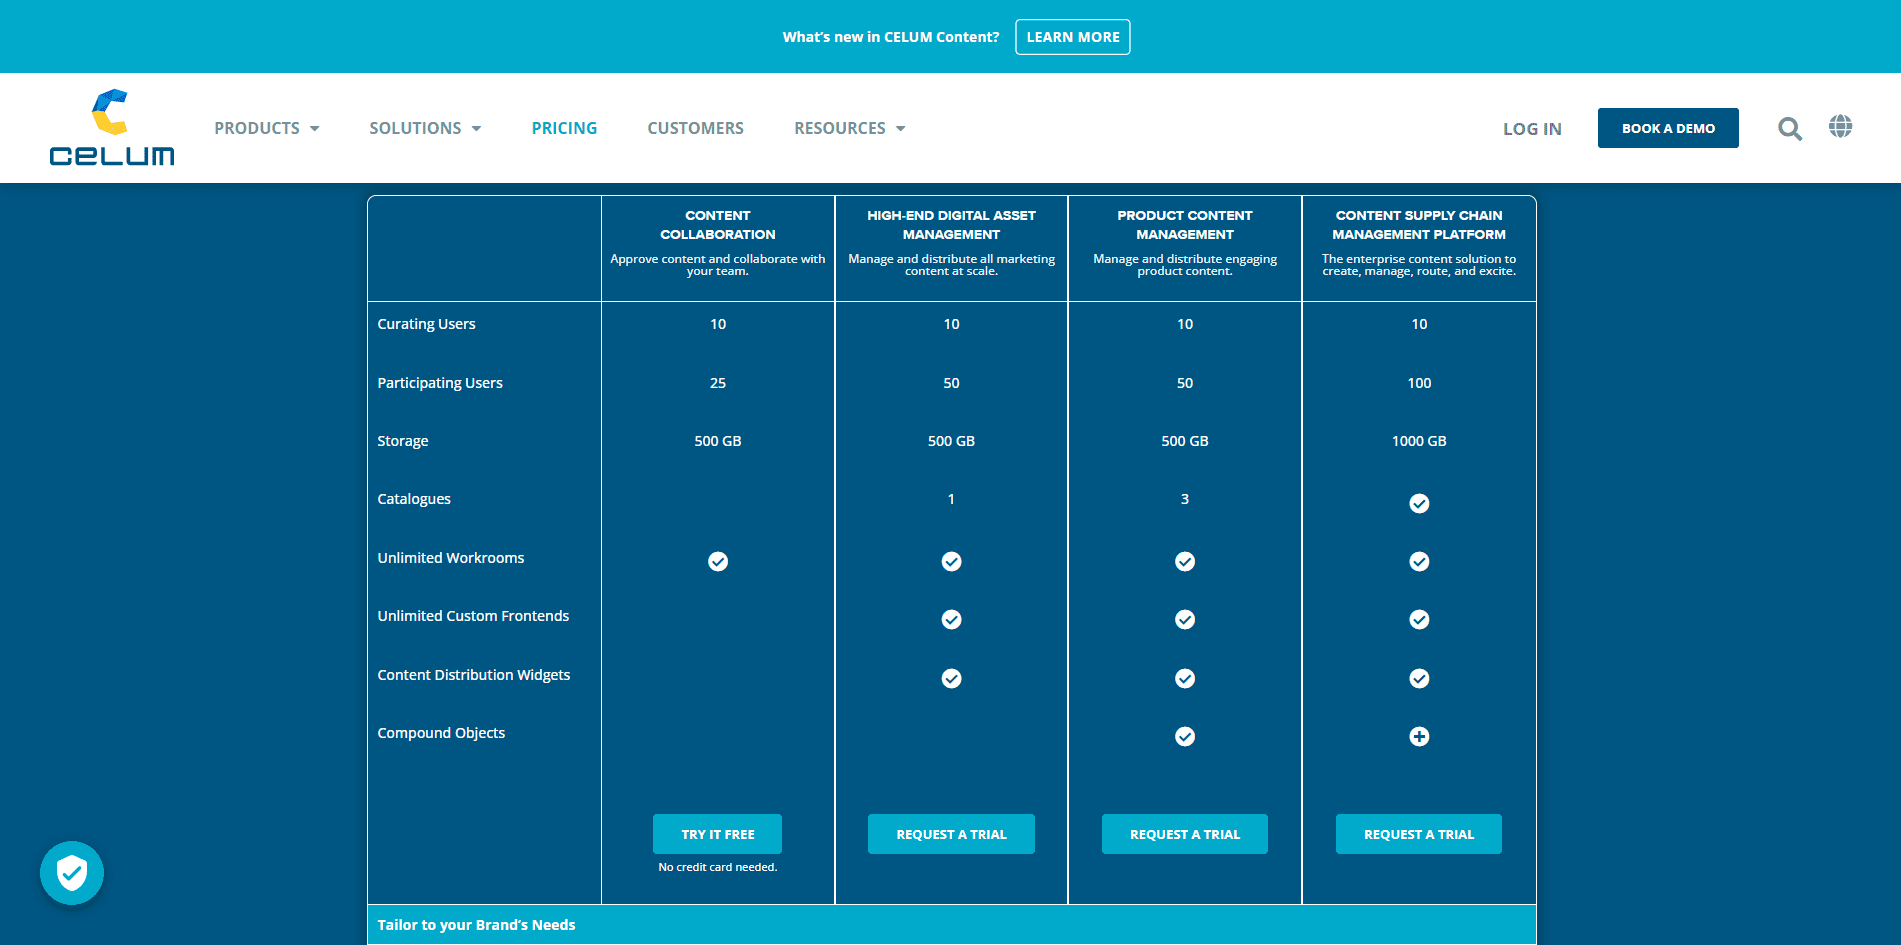 The CELUM pricing page, showing four packages including content collaboration, high-end digital asset management, product content management, and content supply chain management platforms.